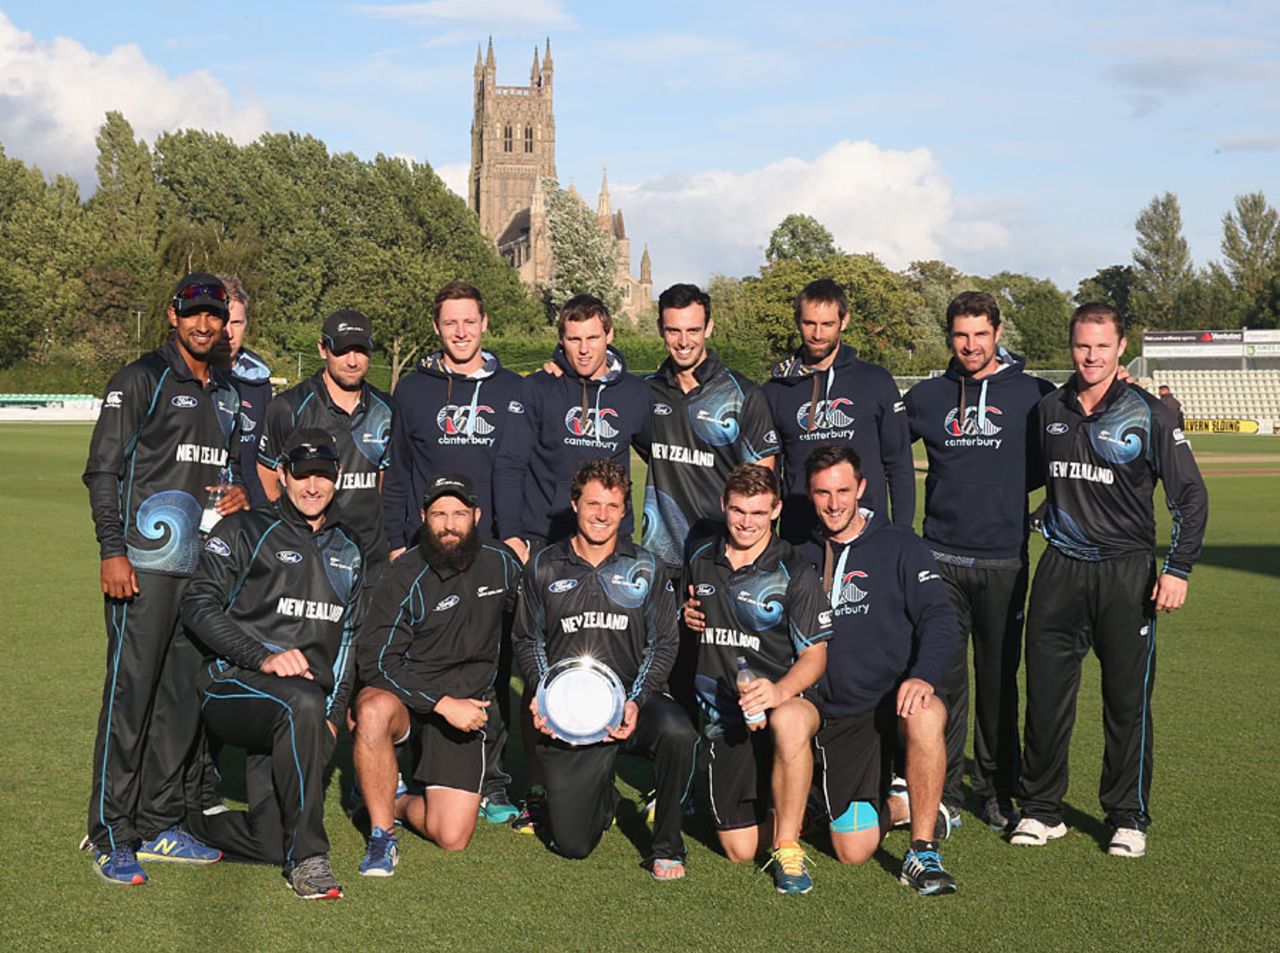 New Zealand A celebrate their tri-series success, England Lions v New Zealand A, Tri-series, New Road, August 12, 2014